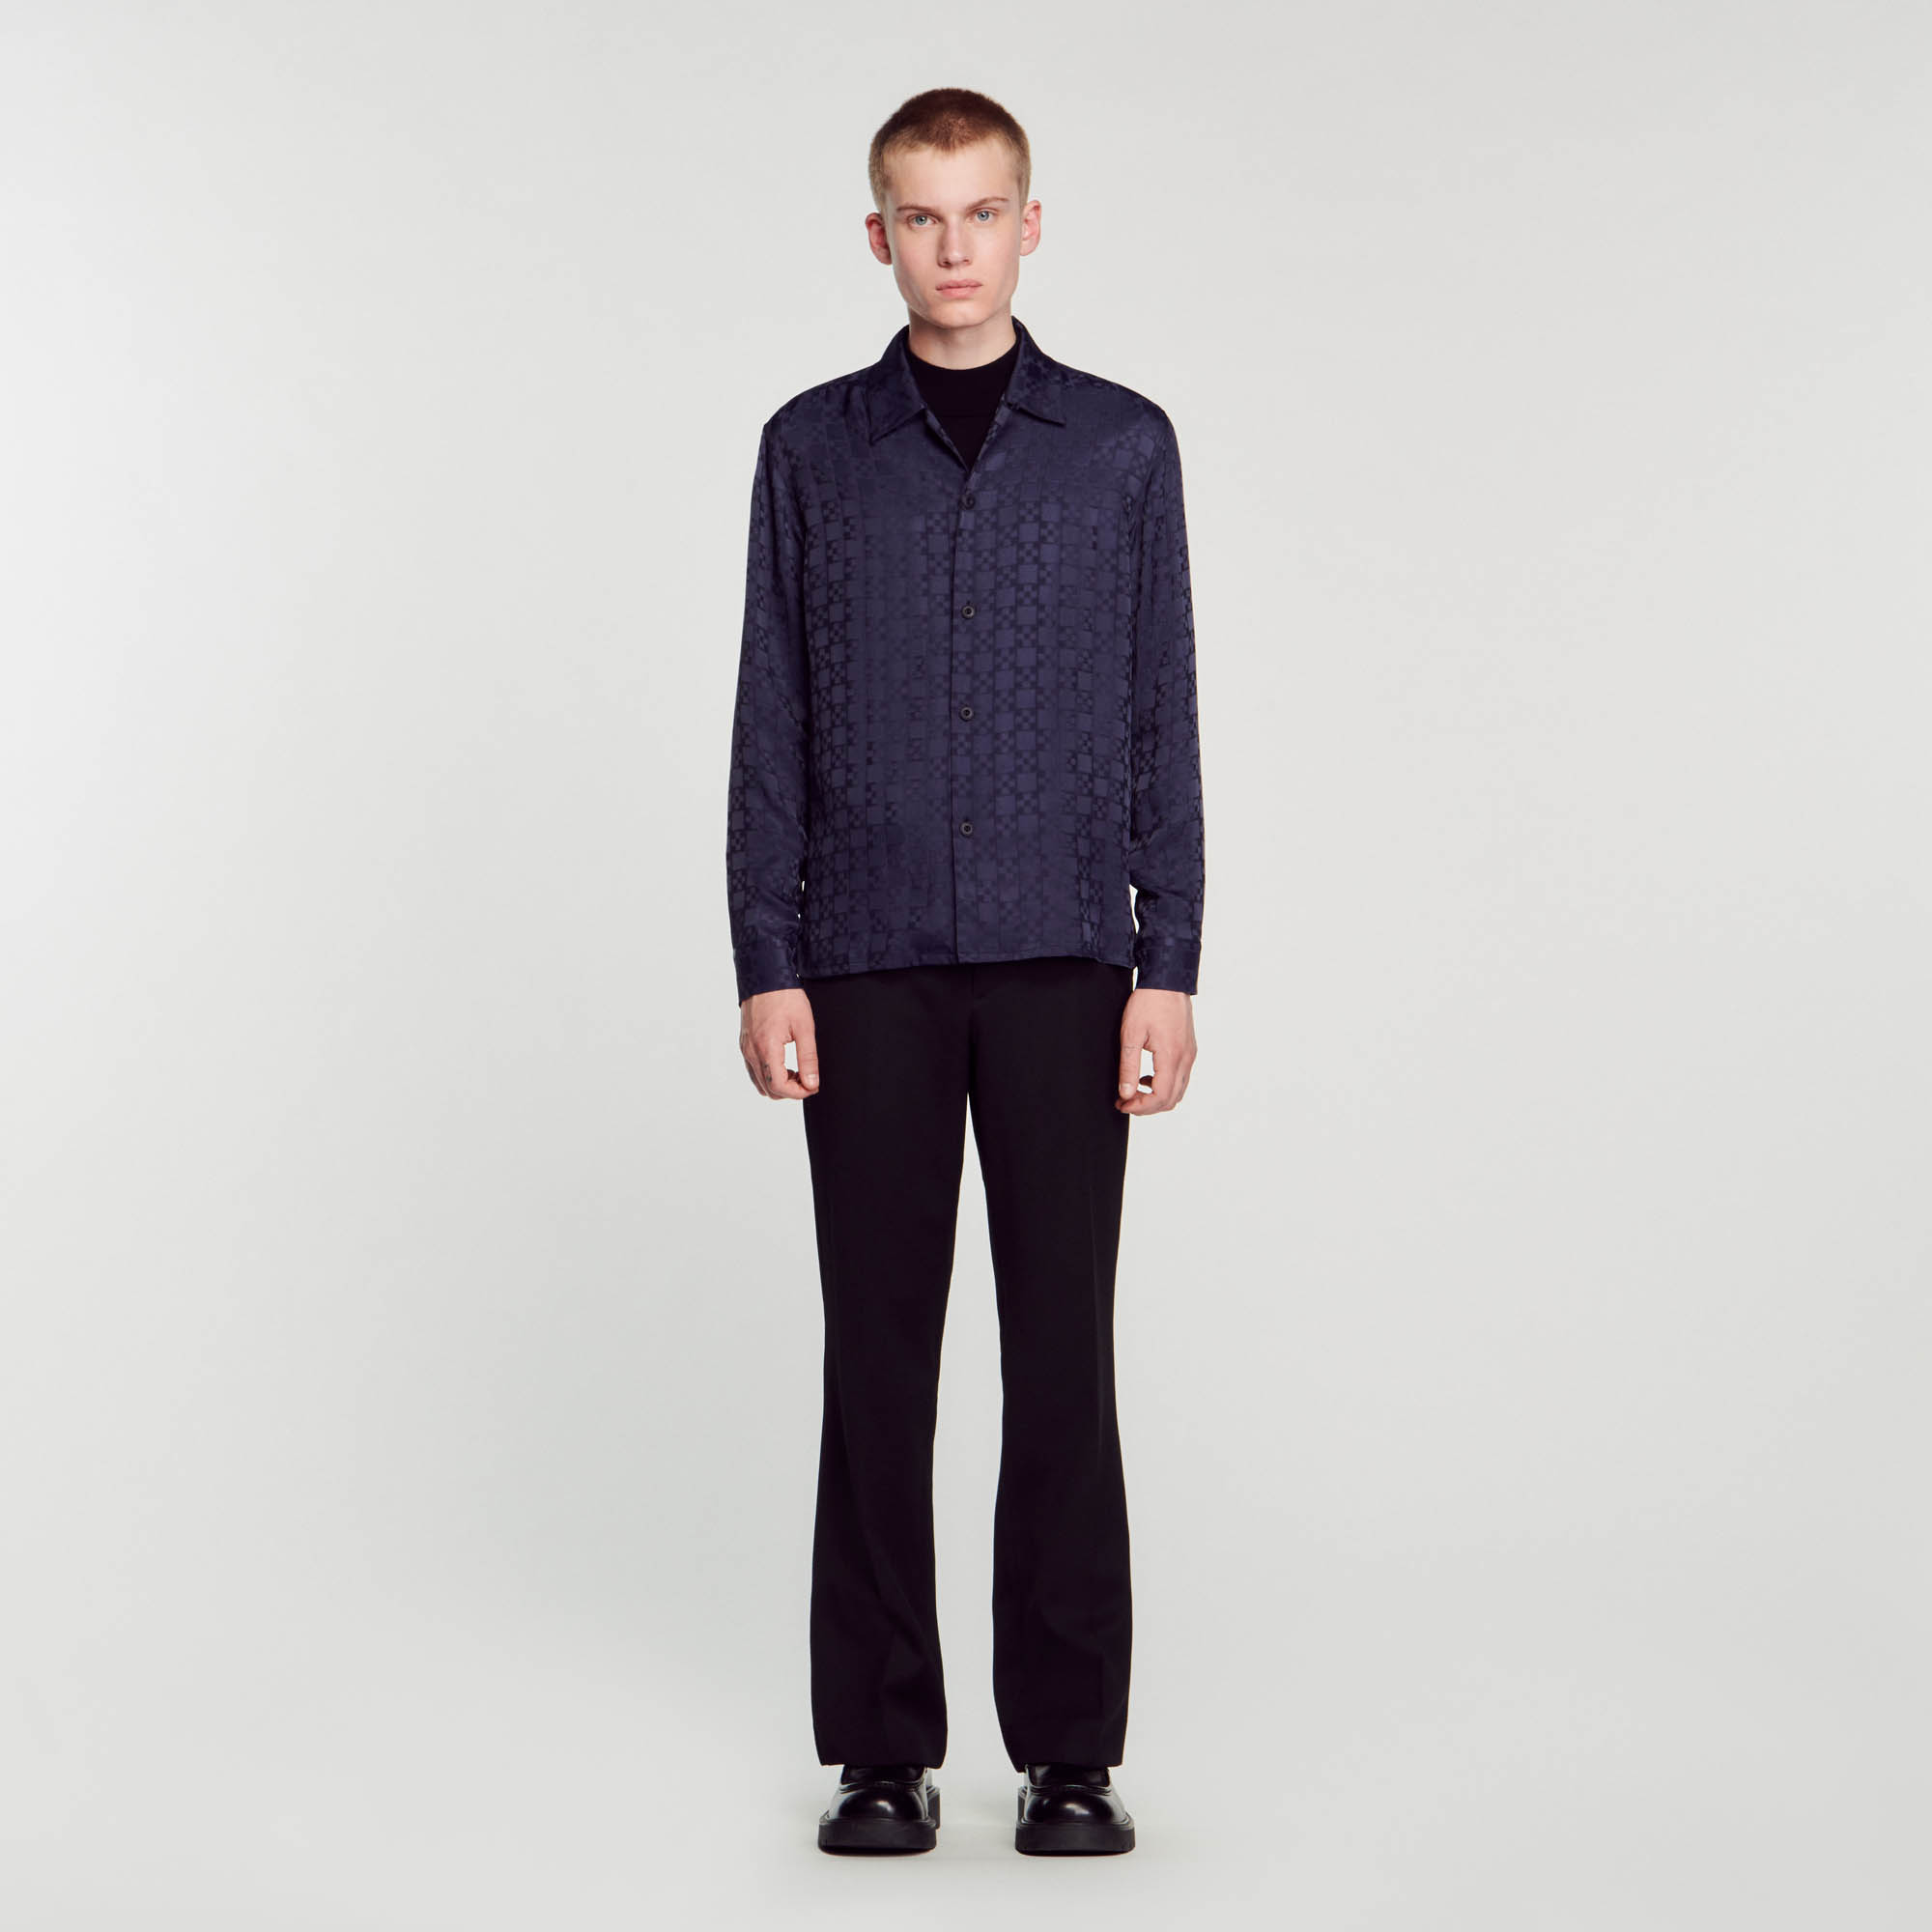 Sandro viscose Satin-finish floaty shirt in Square Cross jacquard, featuring a shark collar, long sleeves with buttoned cuffs and a button fastening